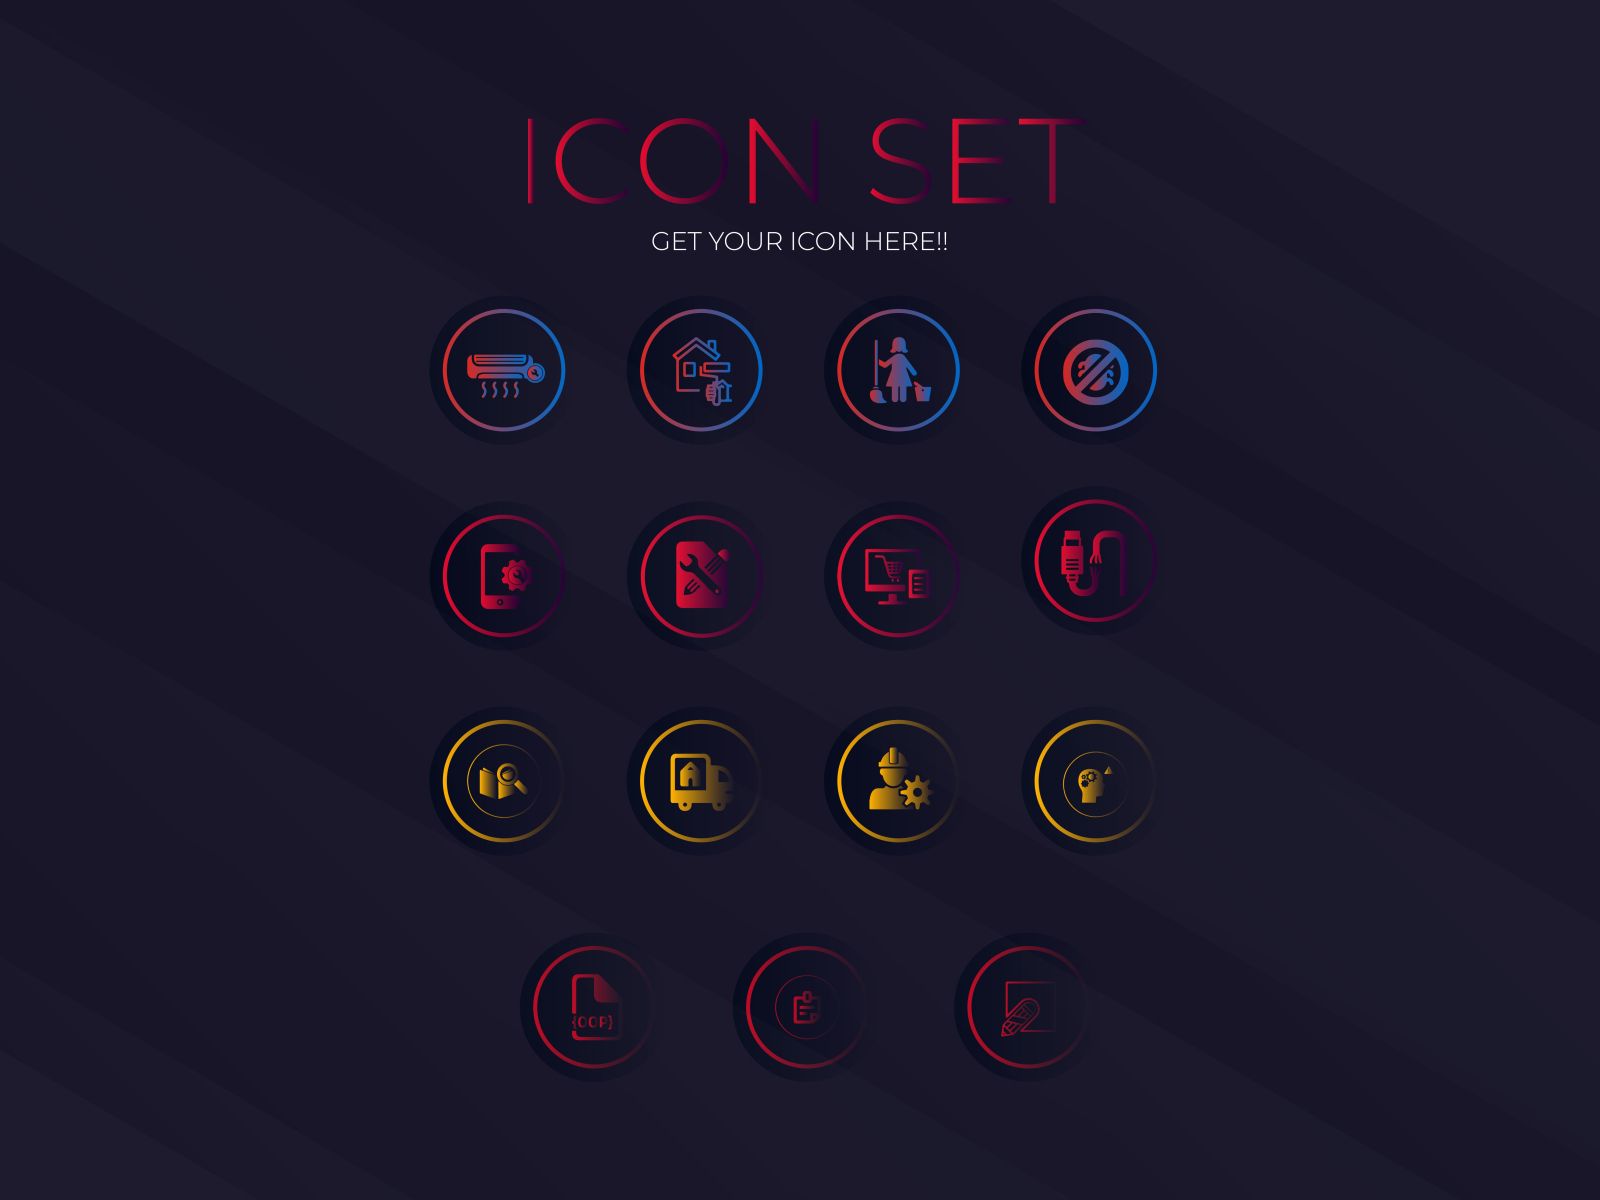 Icons set by Md Asraful Hoque on Dribbble